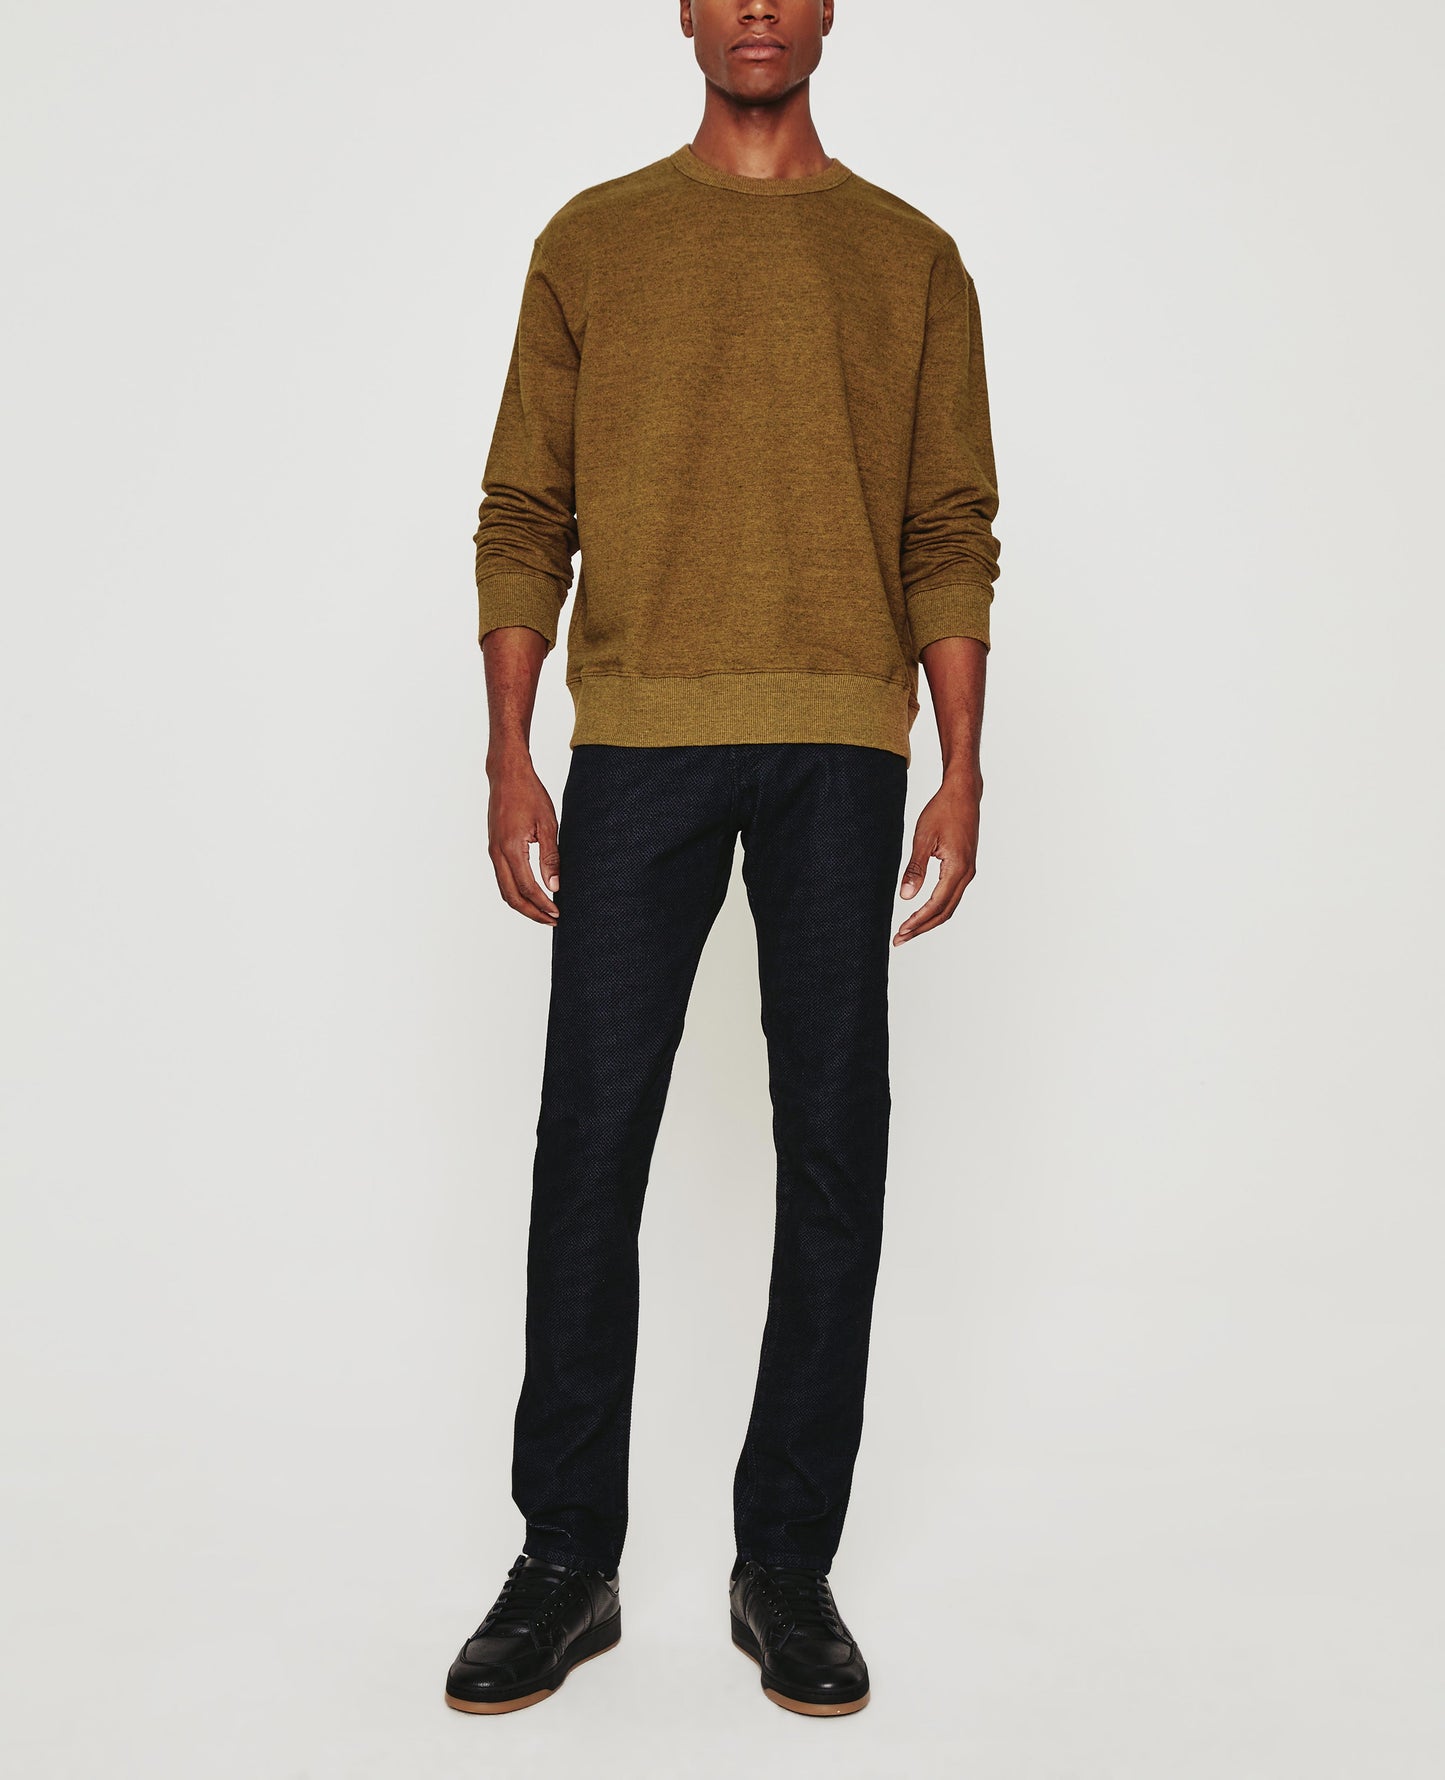 Arc Crew Roasted Seed Relaxed Fit Crew Men Tops Photo 2